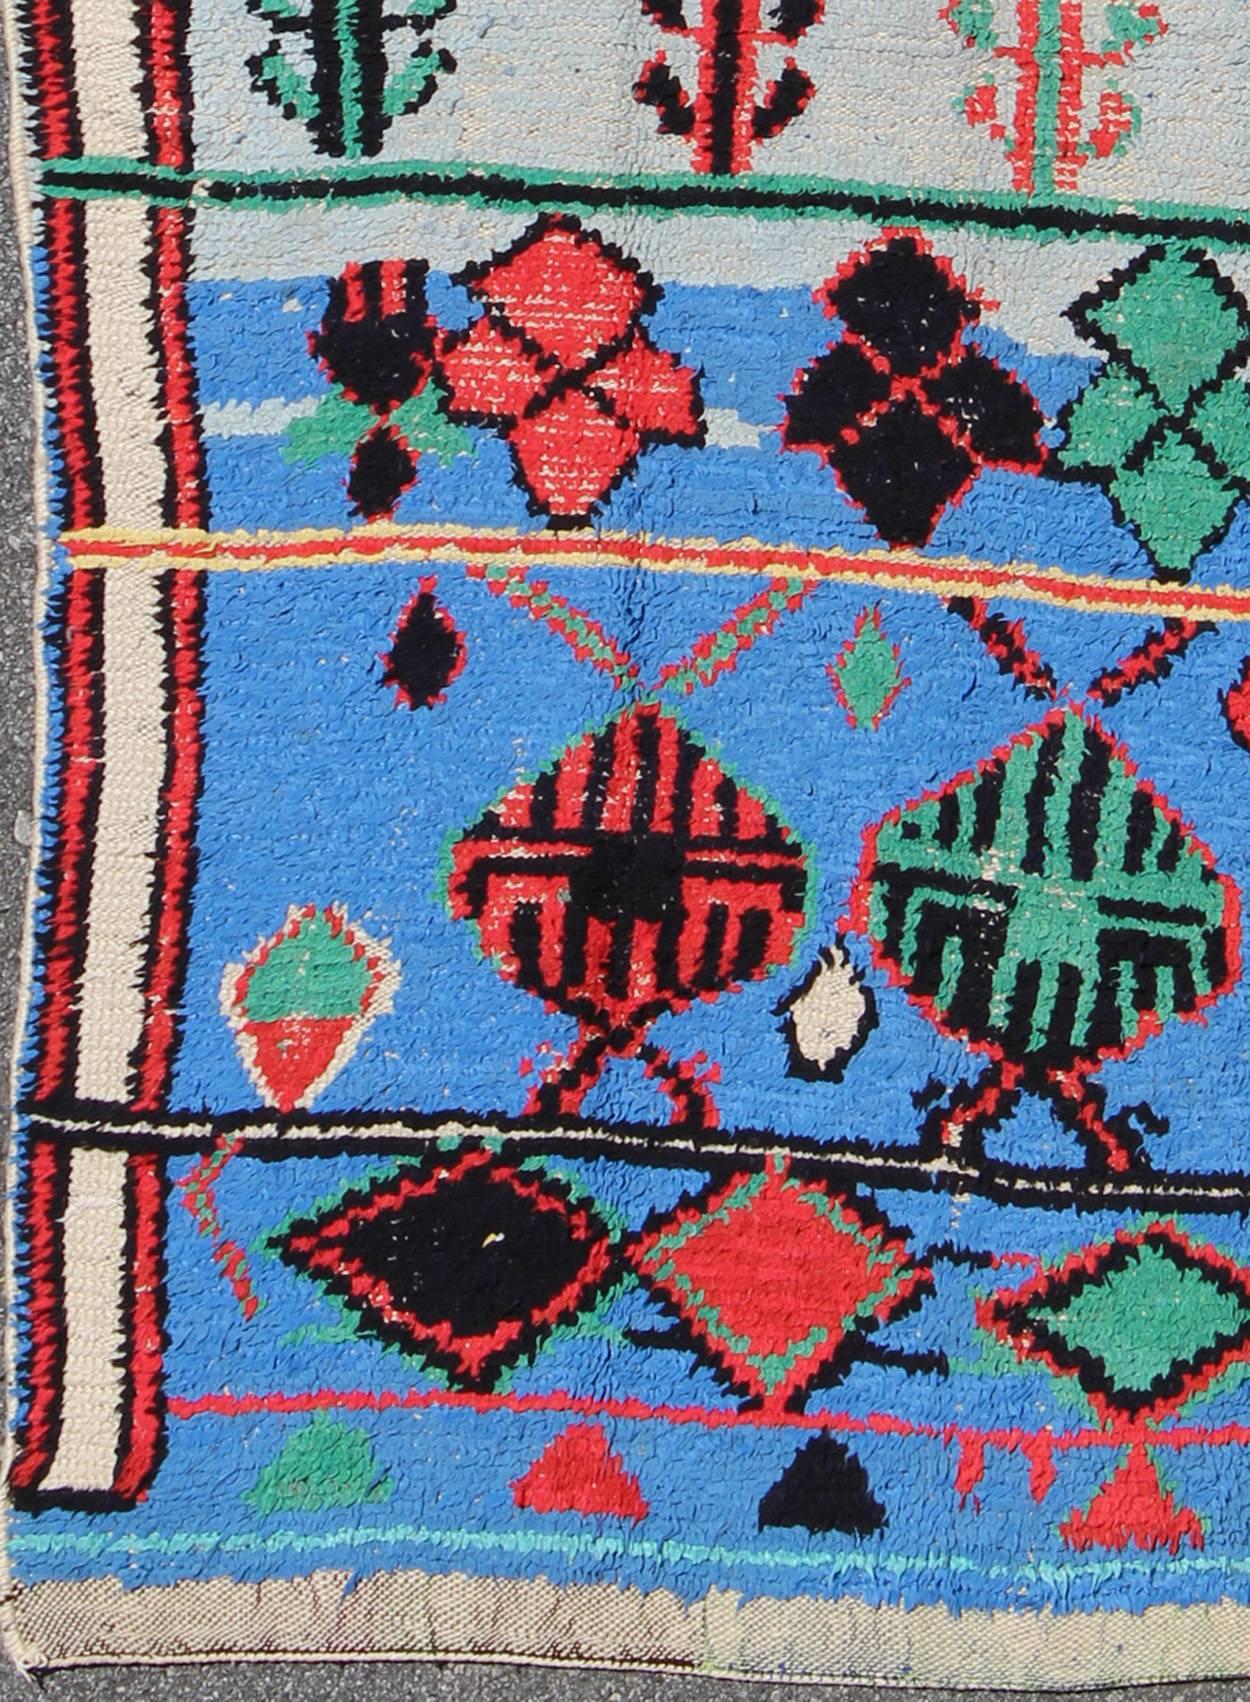 Vivid and vibrant vintage Moroccan rug with scattered tribal motifs, rug EBD-1027, country of origin / type: Morocco / Tribal, circa 1960

This vintage Moroccan carpet, circa 1960 is vivid and vibrant in both color and design. Set on a blue and